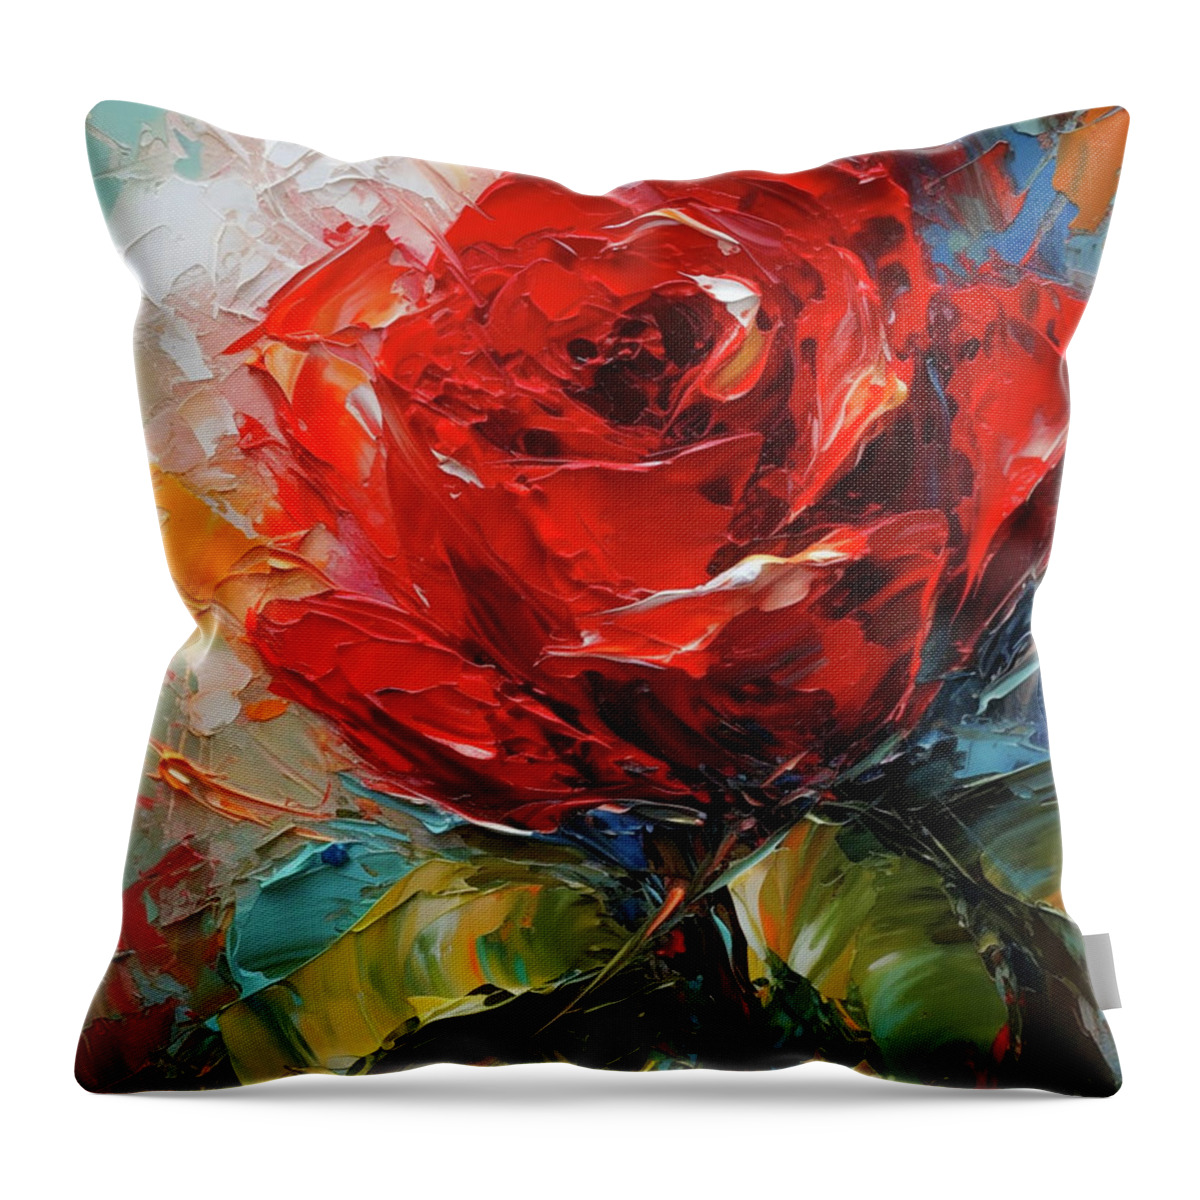 Affectionate Throw Pillow featuring the digital art Pure Love by Glenn Robins